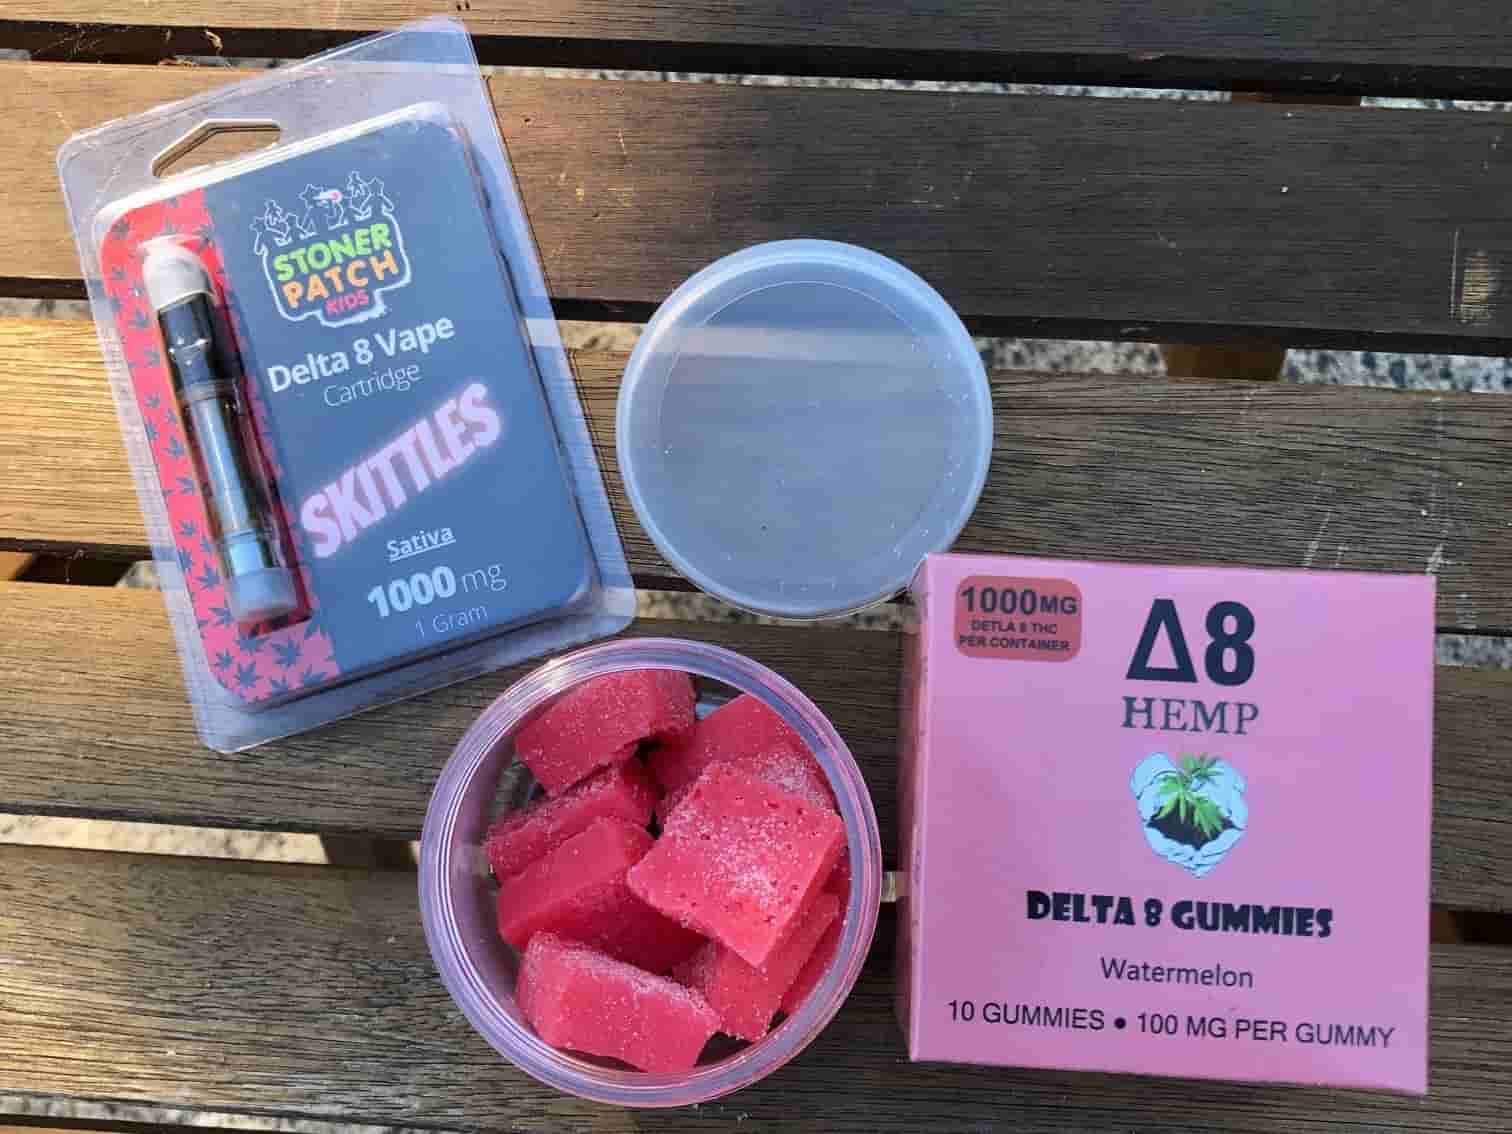 IS DELTA 8 SAFE TO TAKE - Gummies|Thc|Products|Hemp|Product|Brand|Effects|Delta|Gummy|Cbd|Origin|Quality|Dosage|Delta-8|Dose|Usasource|Flavors|Brands|Ingredients|Range|Customers|Edibles|Cartridges|Reviews|Side|List|Health|Cannabis|Lab|Customer|Options|Benefits|Overviewproducts|Research|Time|Market|Drug|Farms|Party|People|Delta-8 Thc|Delta-8 Products|Delta-9 Thc|Delta-8 Gummies|Delta-8 Thc Products|Delta-8 Brands|Customer Reviews|Brand Overviewproducts|Drug Tests|Free Shipping|Similar Benefits|Vape Cartridges|Hemp Doctor|United States|Third Party Lab|Drug Test|Thc Edibles|Health Canada|Cannabis Plant|Side Effects|Organic Hemp|Diamond Cbd|Reaction Time|Legal Hemp|Psychoactive Effects|Psychoactive Properties|Third Party|Dry Eyes|Delta-8 Market|Tolerance Level